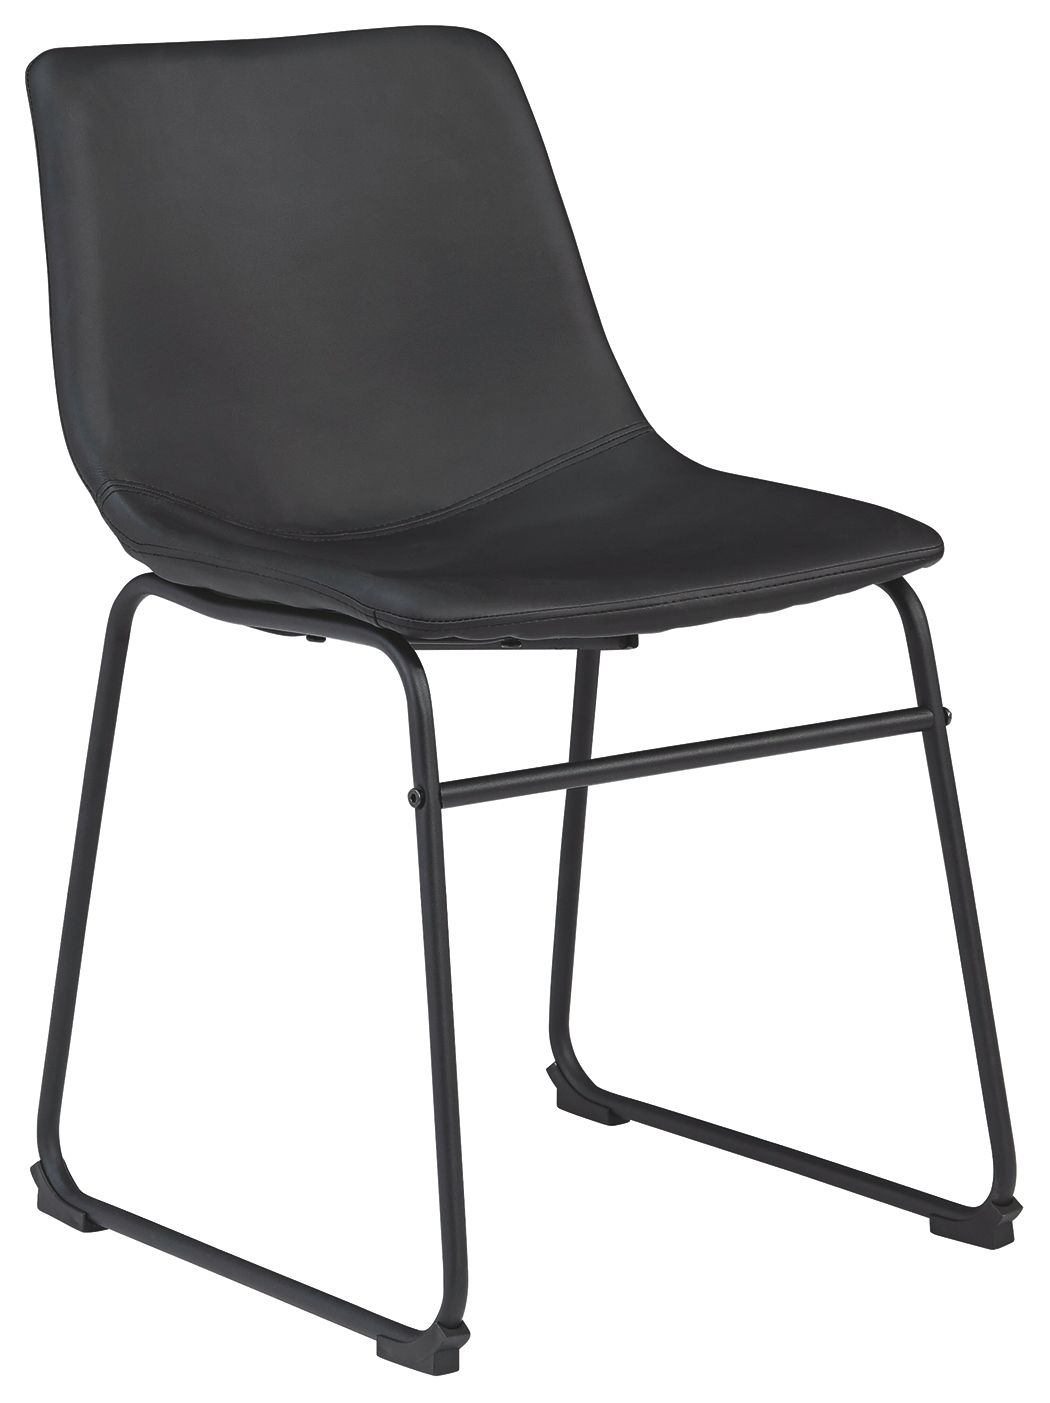 Centiar - Upholstered Side Chair